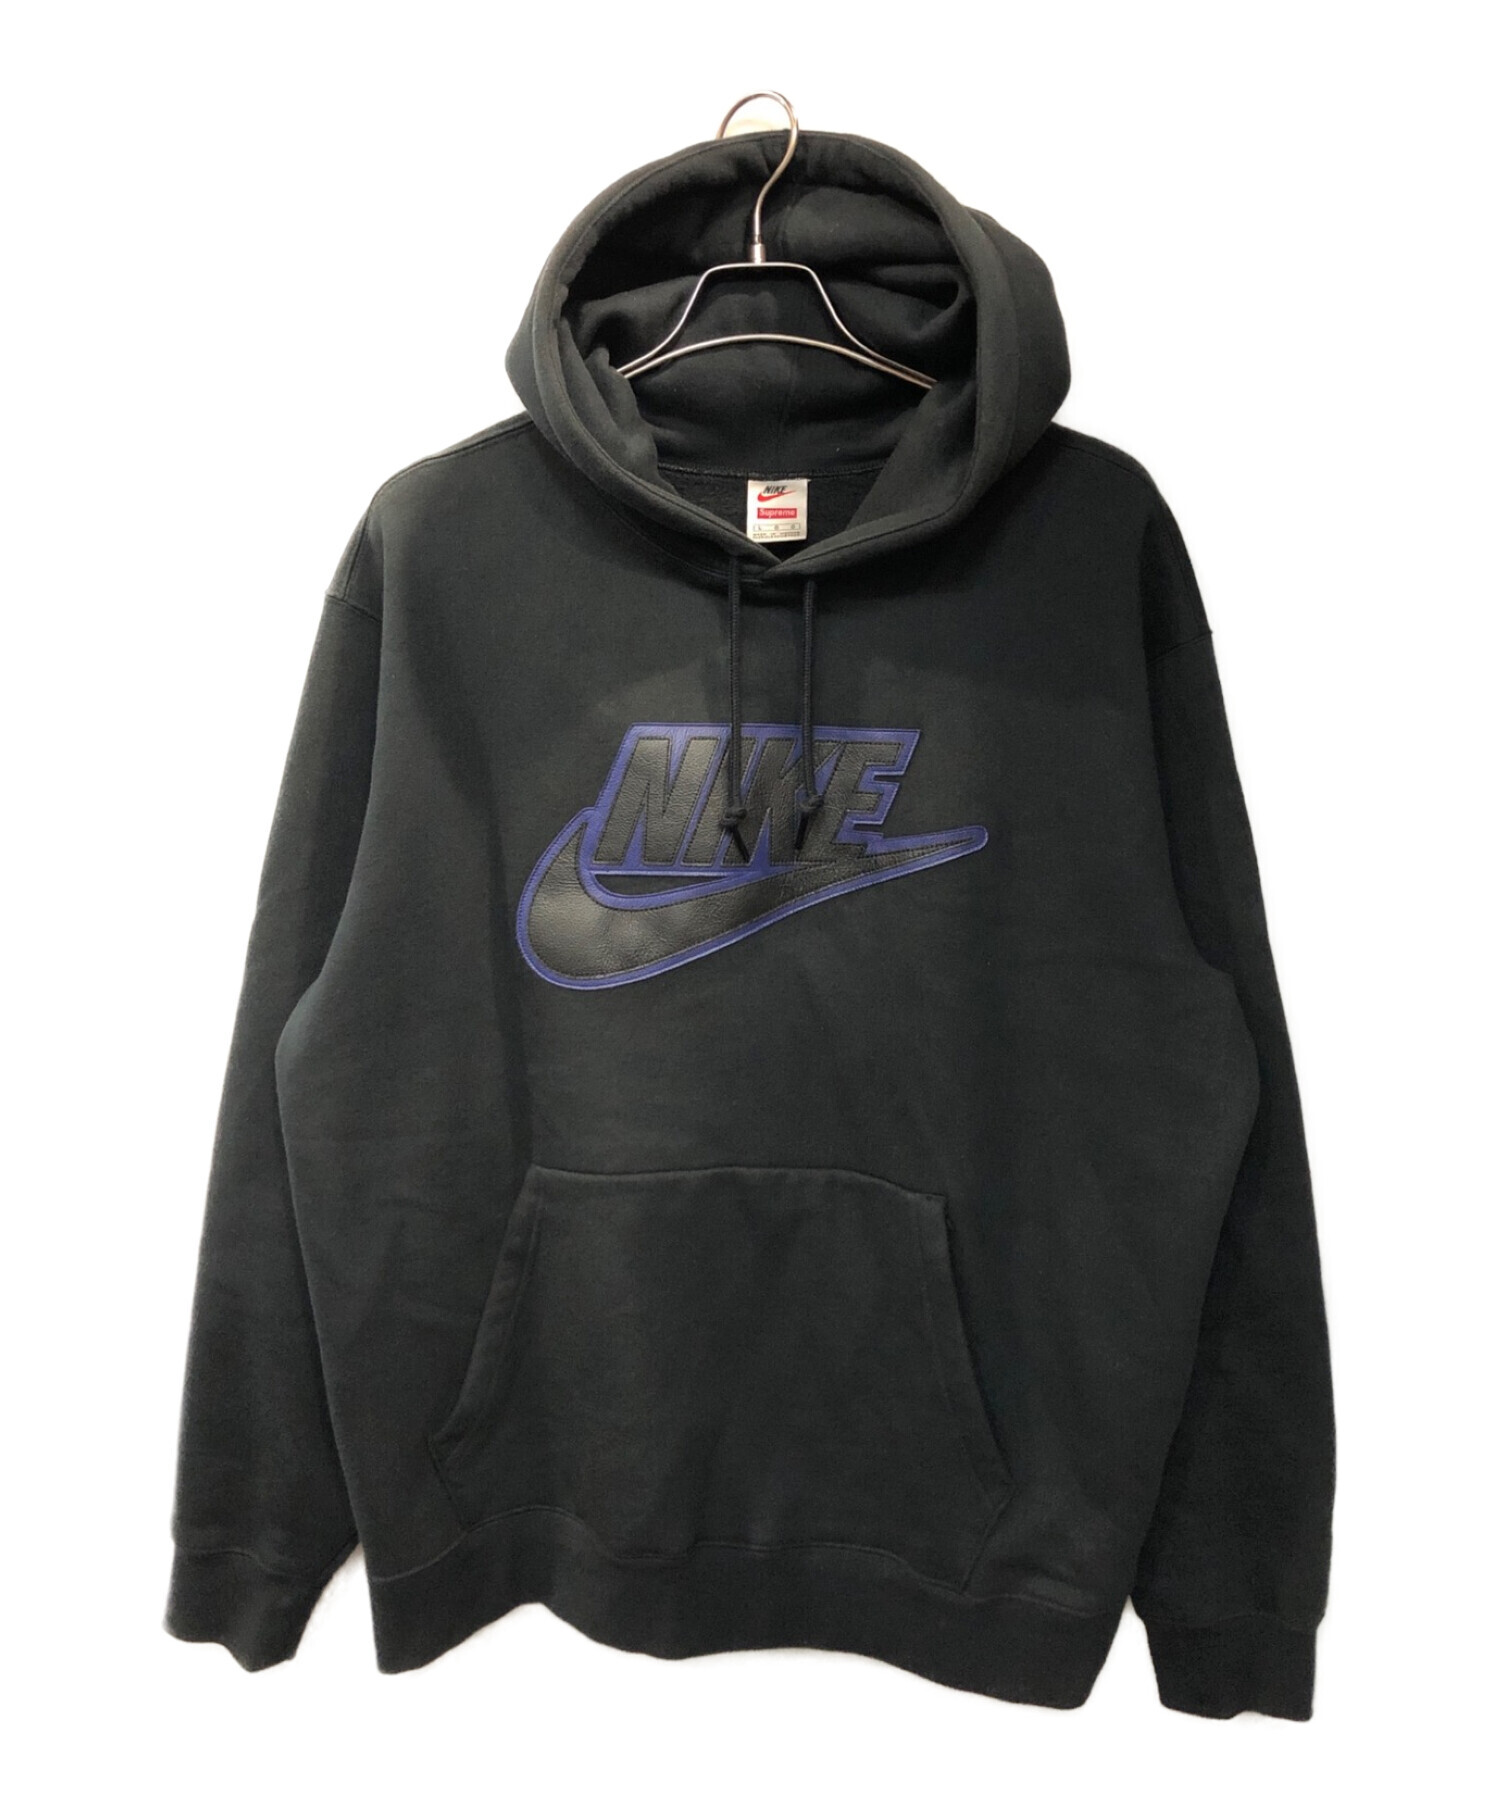 Supreme Nike Leather Appliqué Hooded